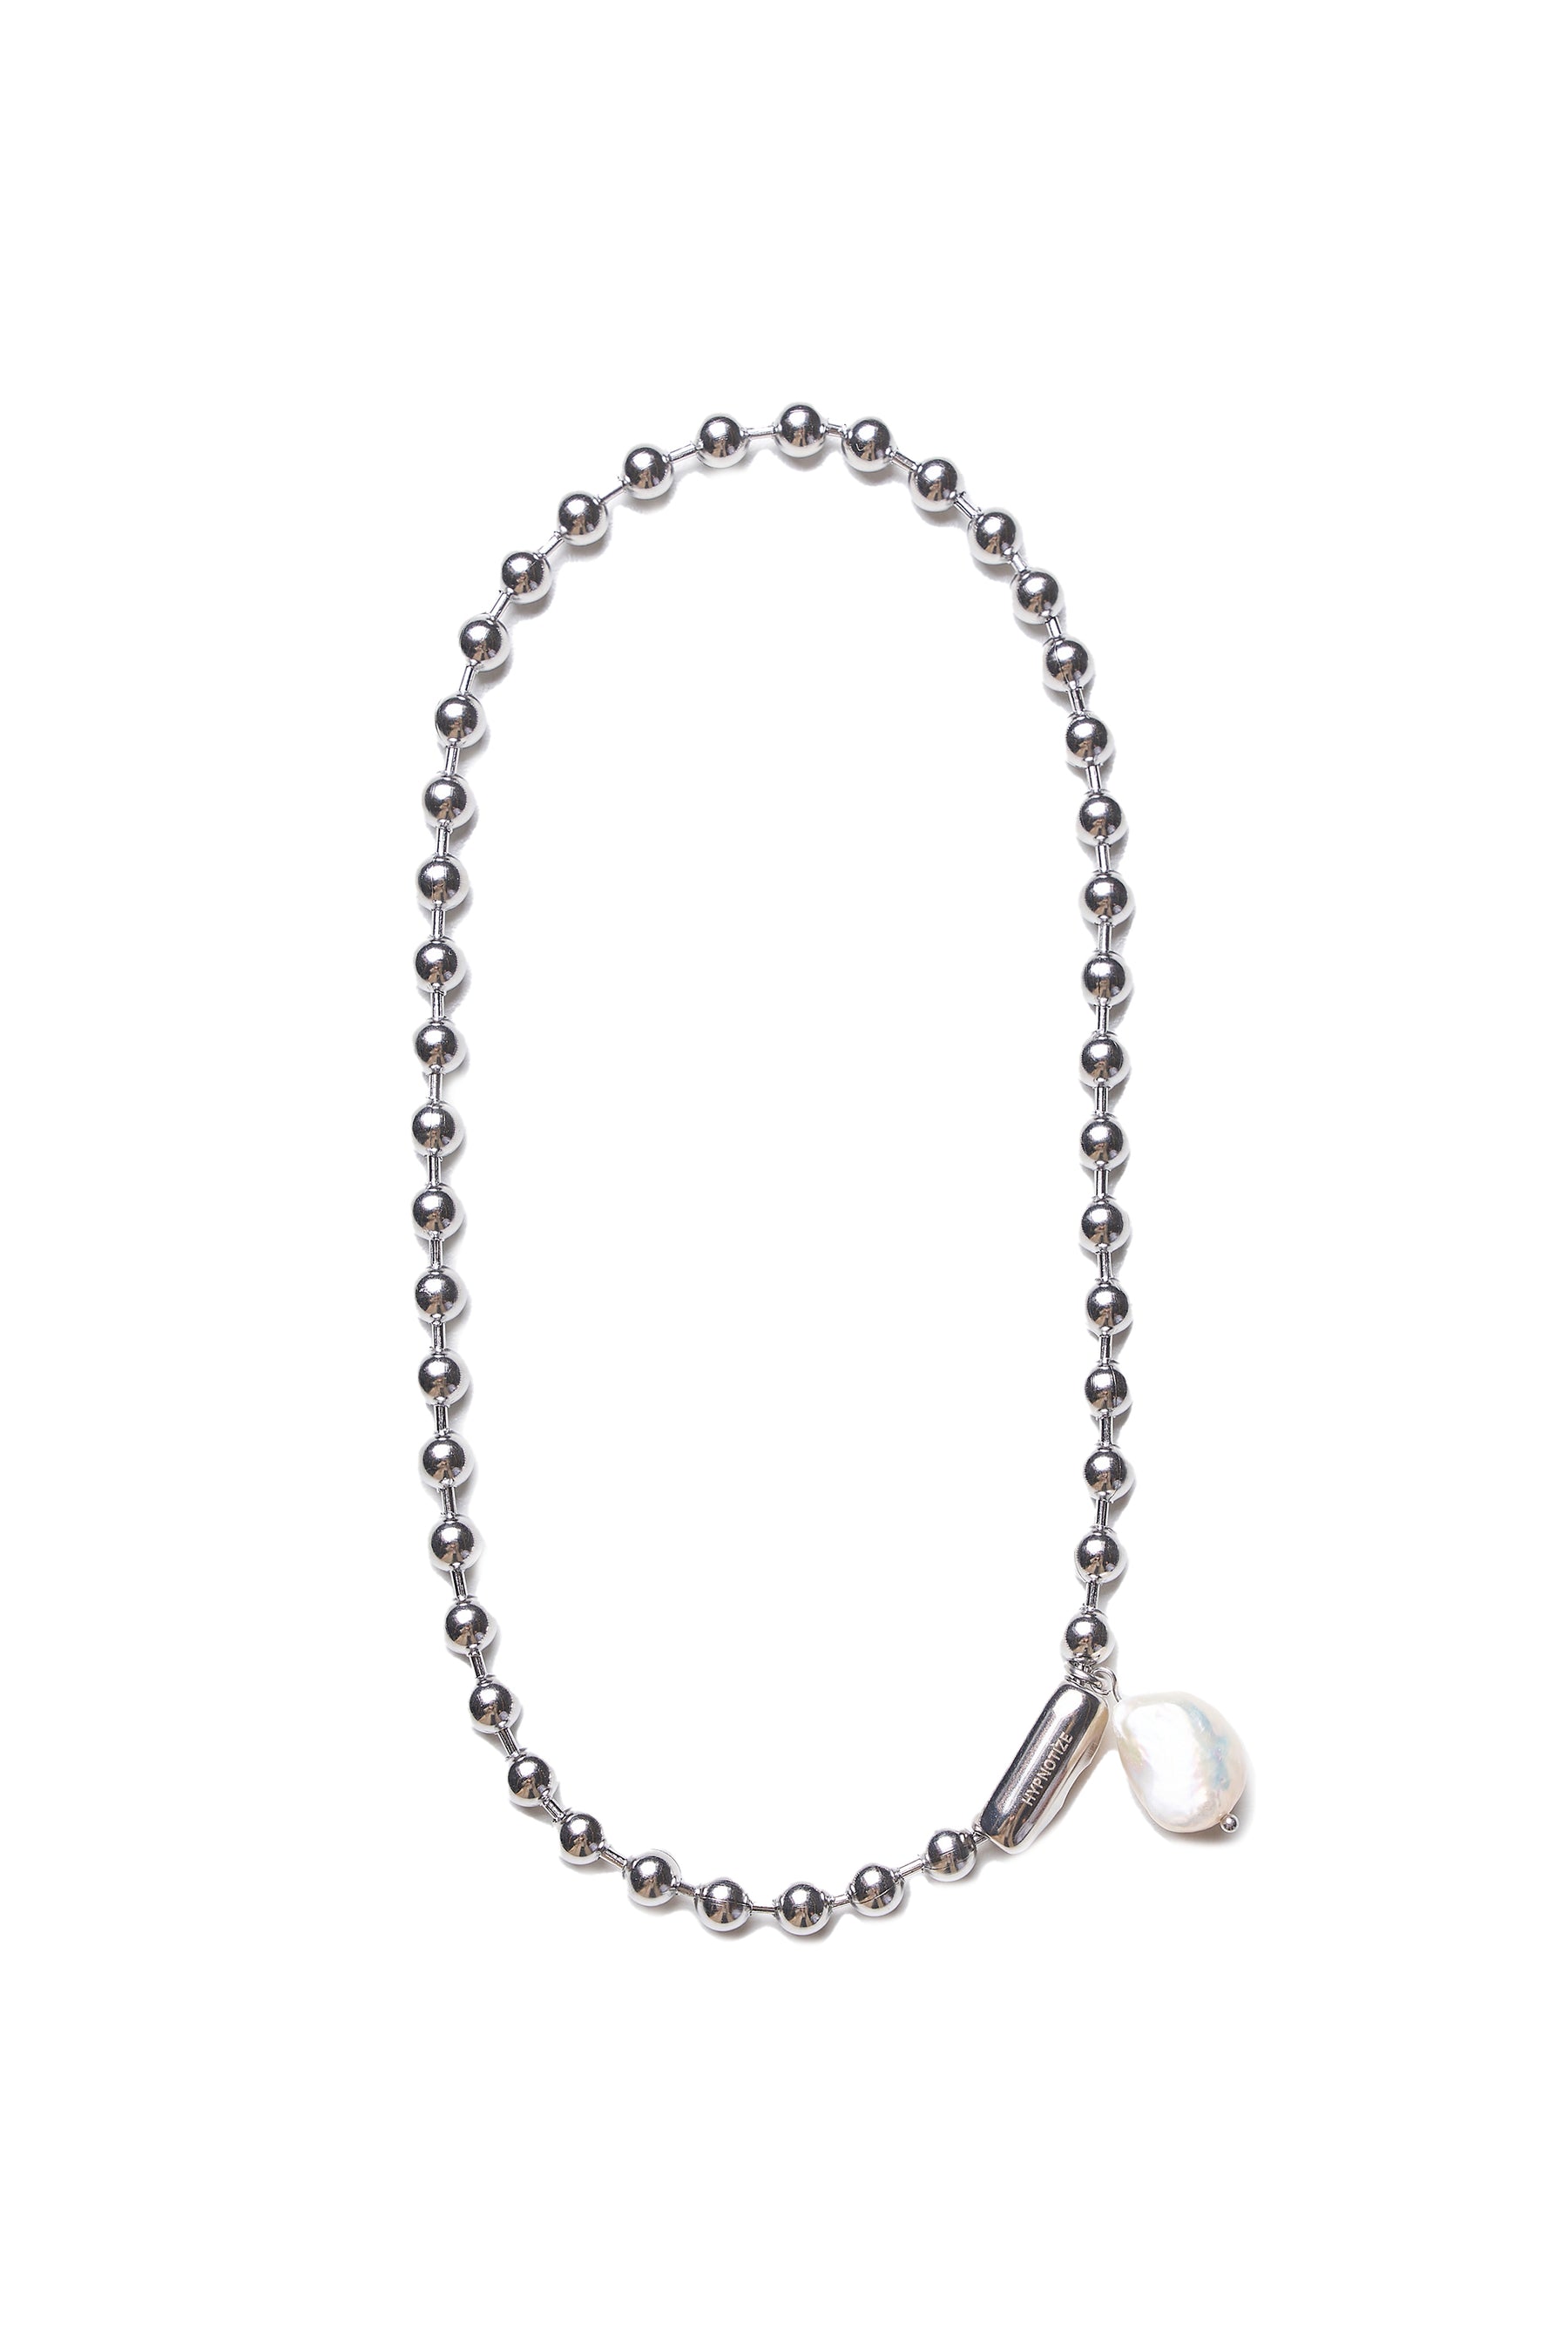 HYPNOTIZE ヒプノタイズFW23 PEARL PENDANT BALL CHAIN NECKLACE / SIL